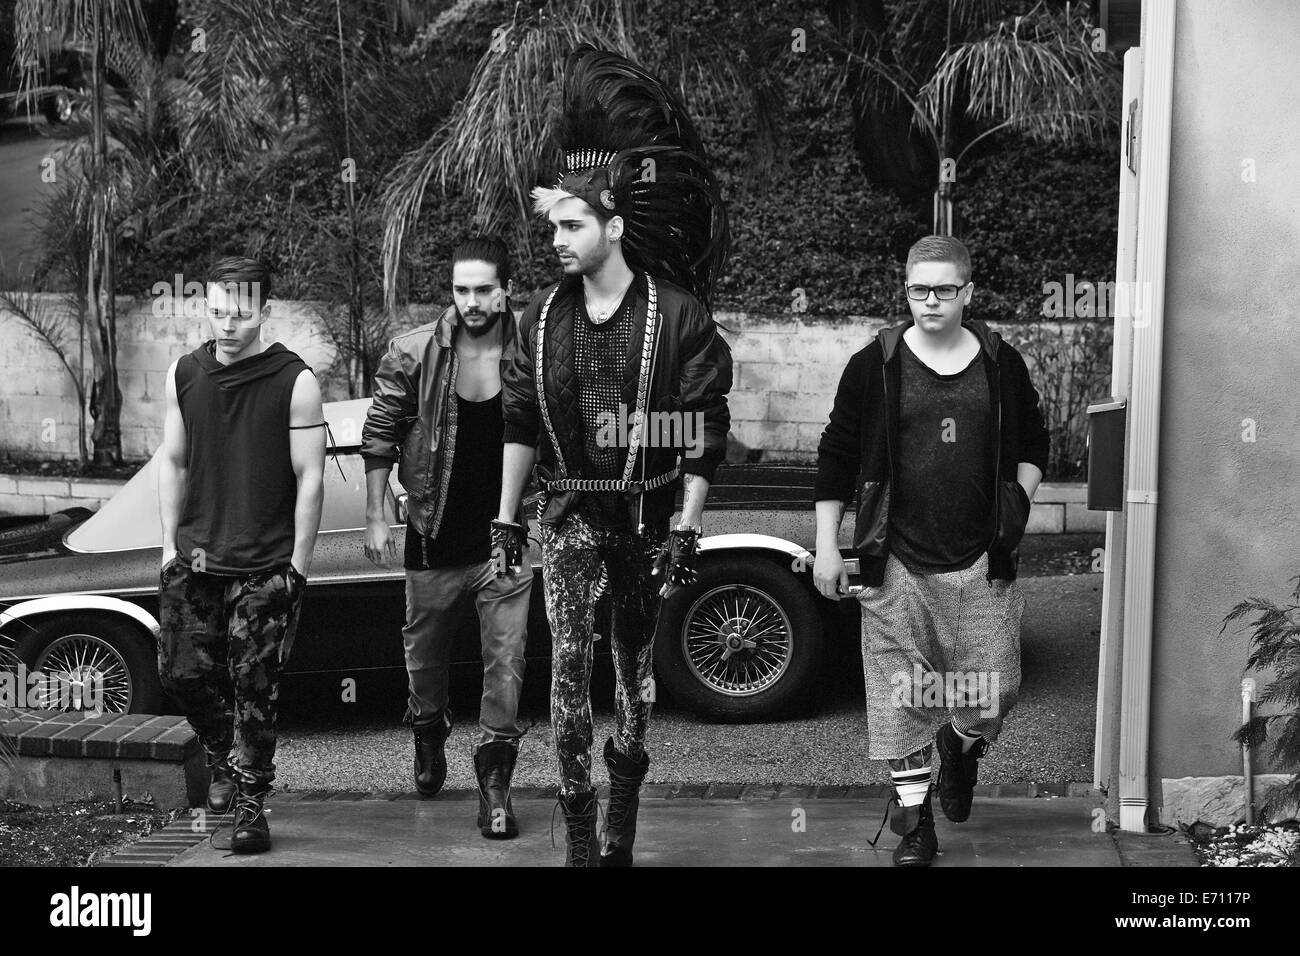 HANDOUT - An undated handout picture shows Georg Moritz Hagen Listing (l-r), Tom Kaulitz, Bill Kaulitz und Gustav Klaus Wolfgang Schaefer of German band Tokio Hotel. The band returns with a new album five years after their last one. 'Kings of Suburbia' will be released on 03 October 2014, said a spokesperson of record label Universal. Photo: LADO ALEXI/UNIVERSAL MUSIC/DPA Stock Photo